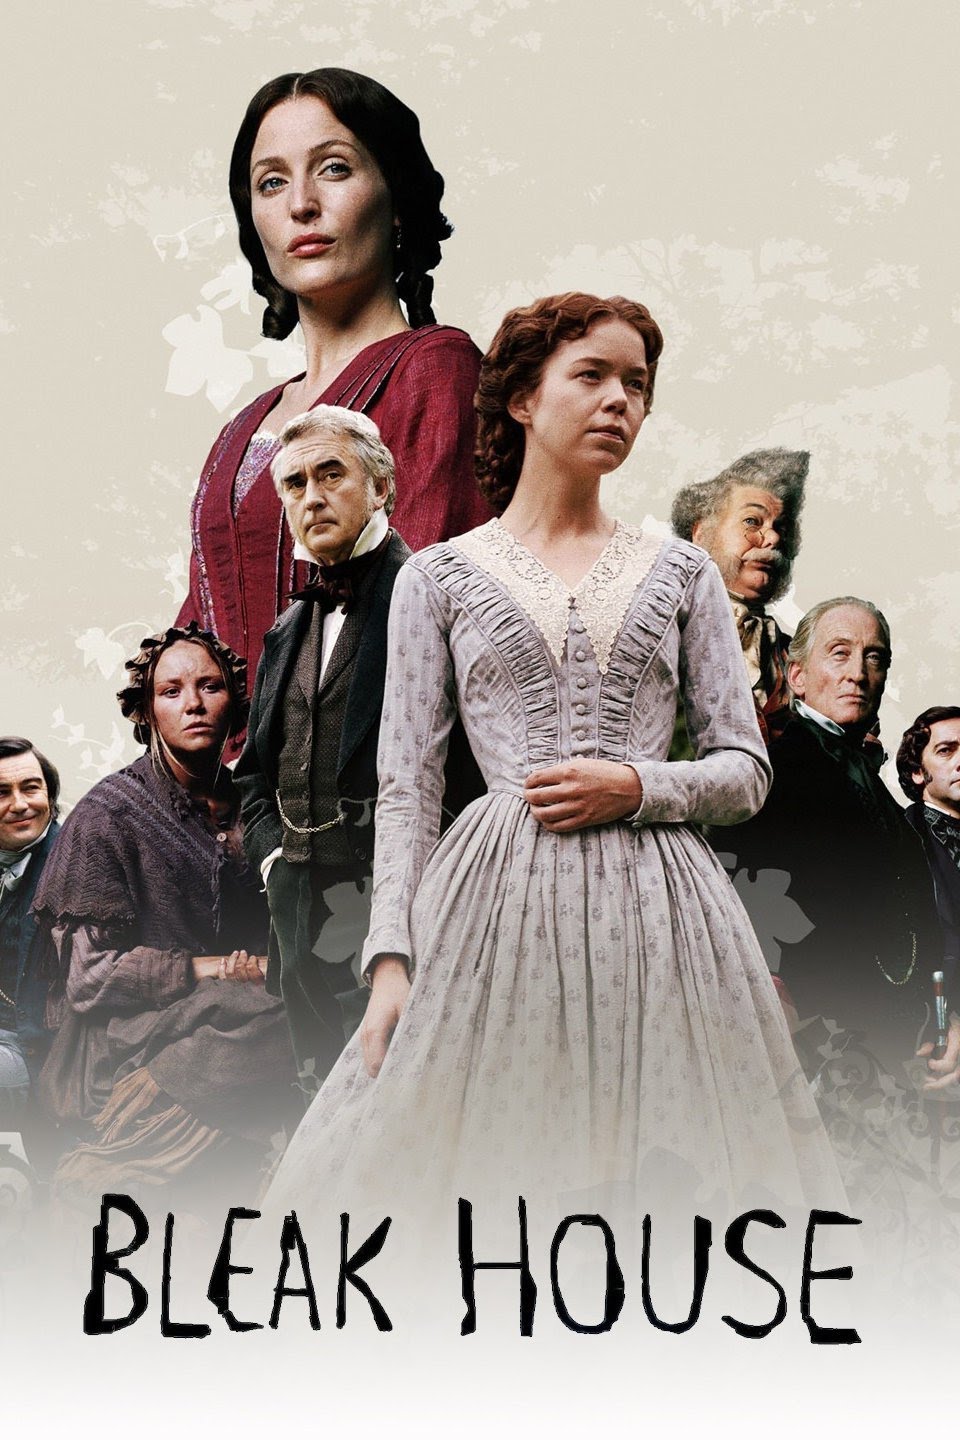 Image result for bleak house with gillian anderson